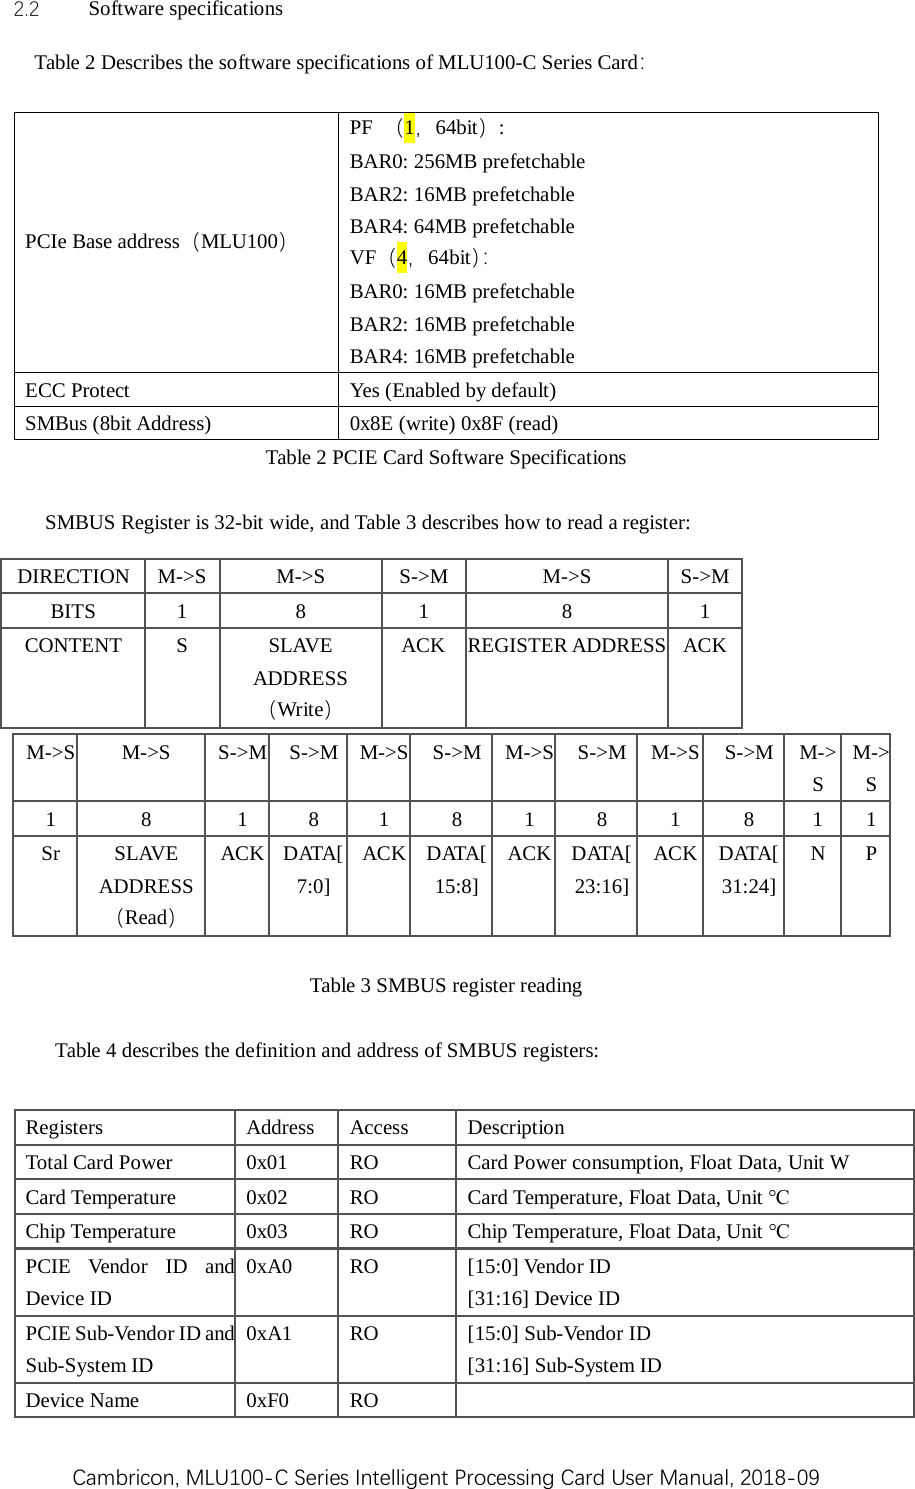 Cambricon, MLU100-C Series Intelligent Processing Card User Manual, 2018-09 2.2 Software specifications Table 2 Describes the software specifications of MLU100-C Series Card：    PCIe Base address（MLU100） PF （1，64bit）:   BAR0: 256MB prefetchable BAR2: 16MB prefetchable BAR4: 64MB prefetchable VF（4，64bit）：  BAR0: 16MB prefetchable BAR2: 16MB prefetchable BAR4: 16MB prefetchable ECC Protect  Yes (Enabled by default) SMBus (8bit Address)    0x8E (write) 0x8F (read) Table 2 PCIE Card Software Specifications     SMBUS Register is 32-bit wide, and Table 3 describes how to read a register:       M-&gt;S M-&gt;S  S-&gt;M S-&gt;M  M-&gt;S S-&gt;M  M-&gt;S S-&gt;M  M-&gt;S S-&gt;M  M-&gt;S M-&gt;S 1  8  1  8  1  8  1  8  1  8  1  1 Sr SLAVE ADDRESS（Read） ACK DATA[7:0] ACK DATA[15:8] ACK DATA[23:16] ACK DATA[31:24] N  P  Table 3 SMBUS register reading  Table 4 describes the definition and address of SMBUS registers: DIRECTION  M-&gt;S  M-&gt;S  S-&gt;M  M-&gt;S  S-&gt;M BITS  1  8  1  8  1 CONTENT  S  SLAVE ADDRESS（Write） ACK REGISTER ADDRESS ACK Registers  Address  Access Description Total Card Power  0x01  RO  Card Power consumption, Float Data, Unit W Card Temperature  0x02  RO  Card Temperature, Float Data, Unit ℃ Chip Temperature  0x03  RO  Chip Temperature, Float Data, Unit ℃ PCIE Vendor ID and Device ID 0xA0  RO [15:0] Vendor ID   [31:16] Device ID PCIE Sub-Vendor ID and Sub-System ID 0xA1  RO  [15:0] Sub-Vendor ID [31:16] Sub-System ID       Device Name  0xF0  RO   